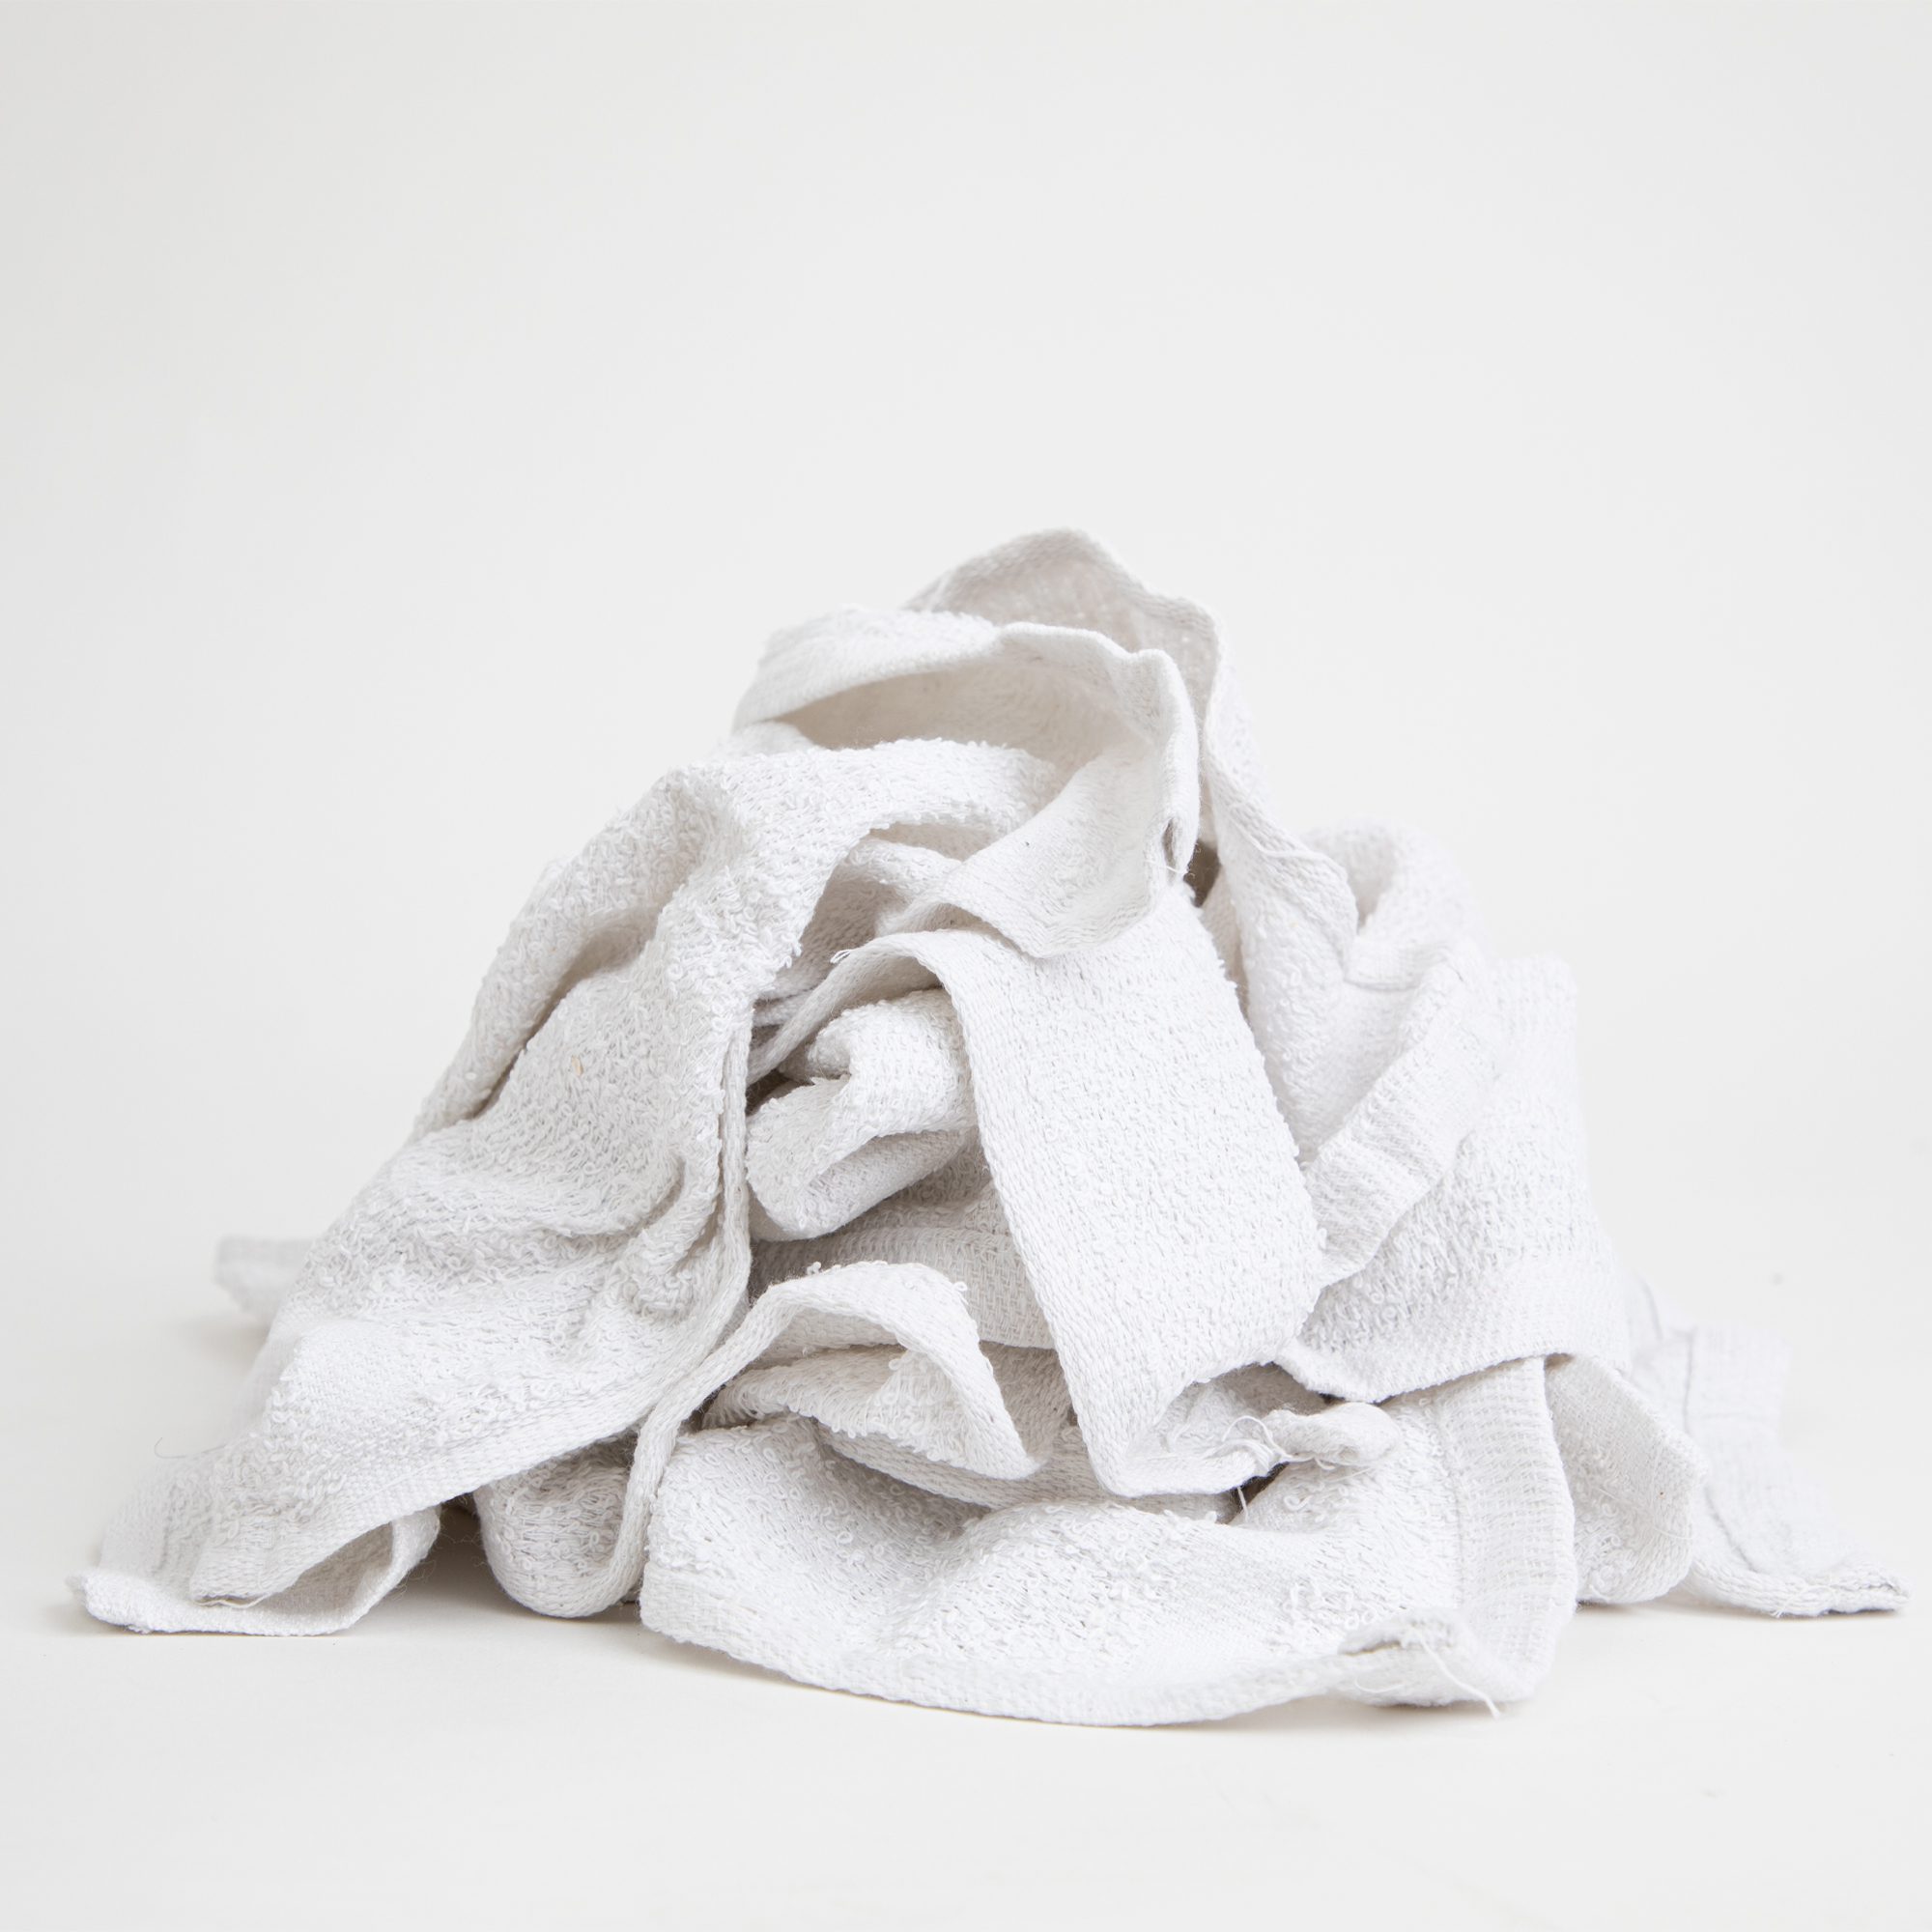 ProLine Terry Towels 48-Pack Terry Towel in the Cleaning Cloths department  at